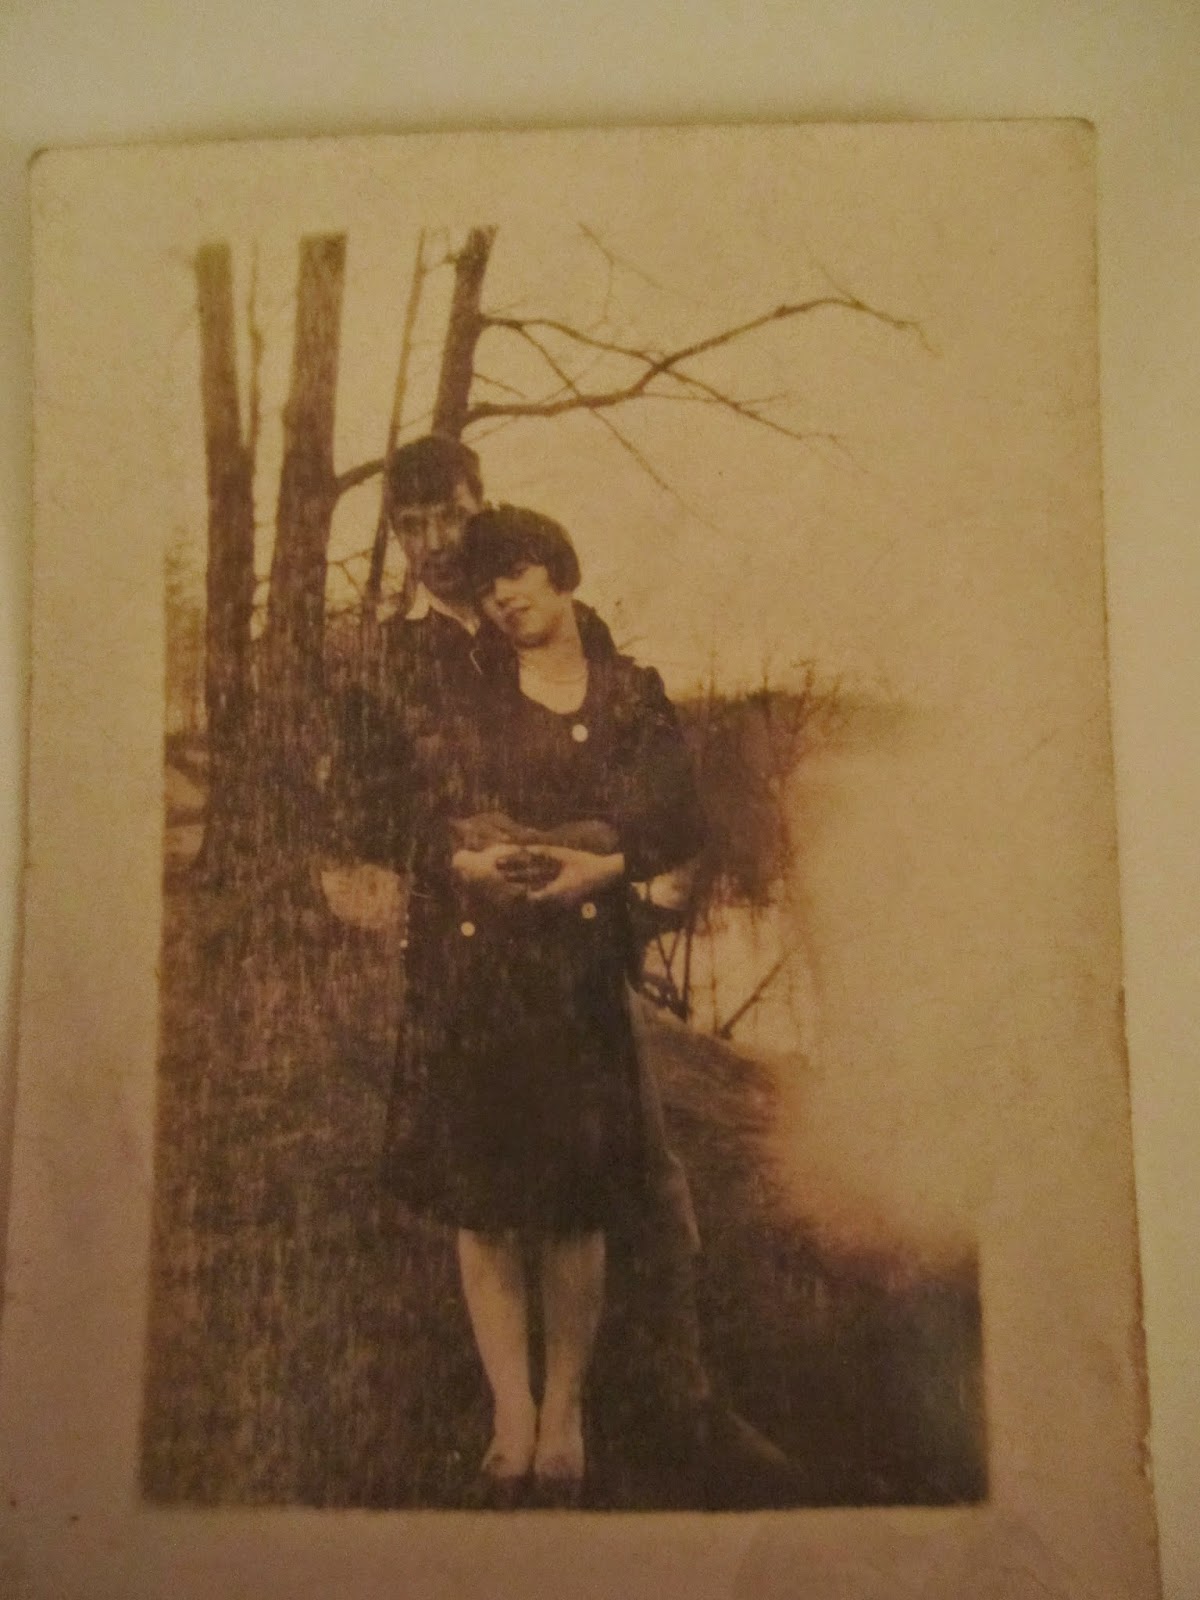 Climbing My Family Tree: Clarence Snyder & Mabel Erwin at 17 (1927)